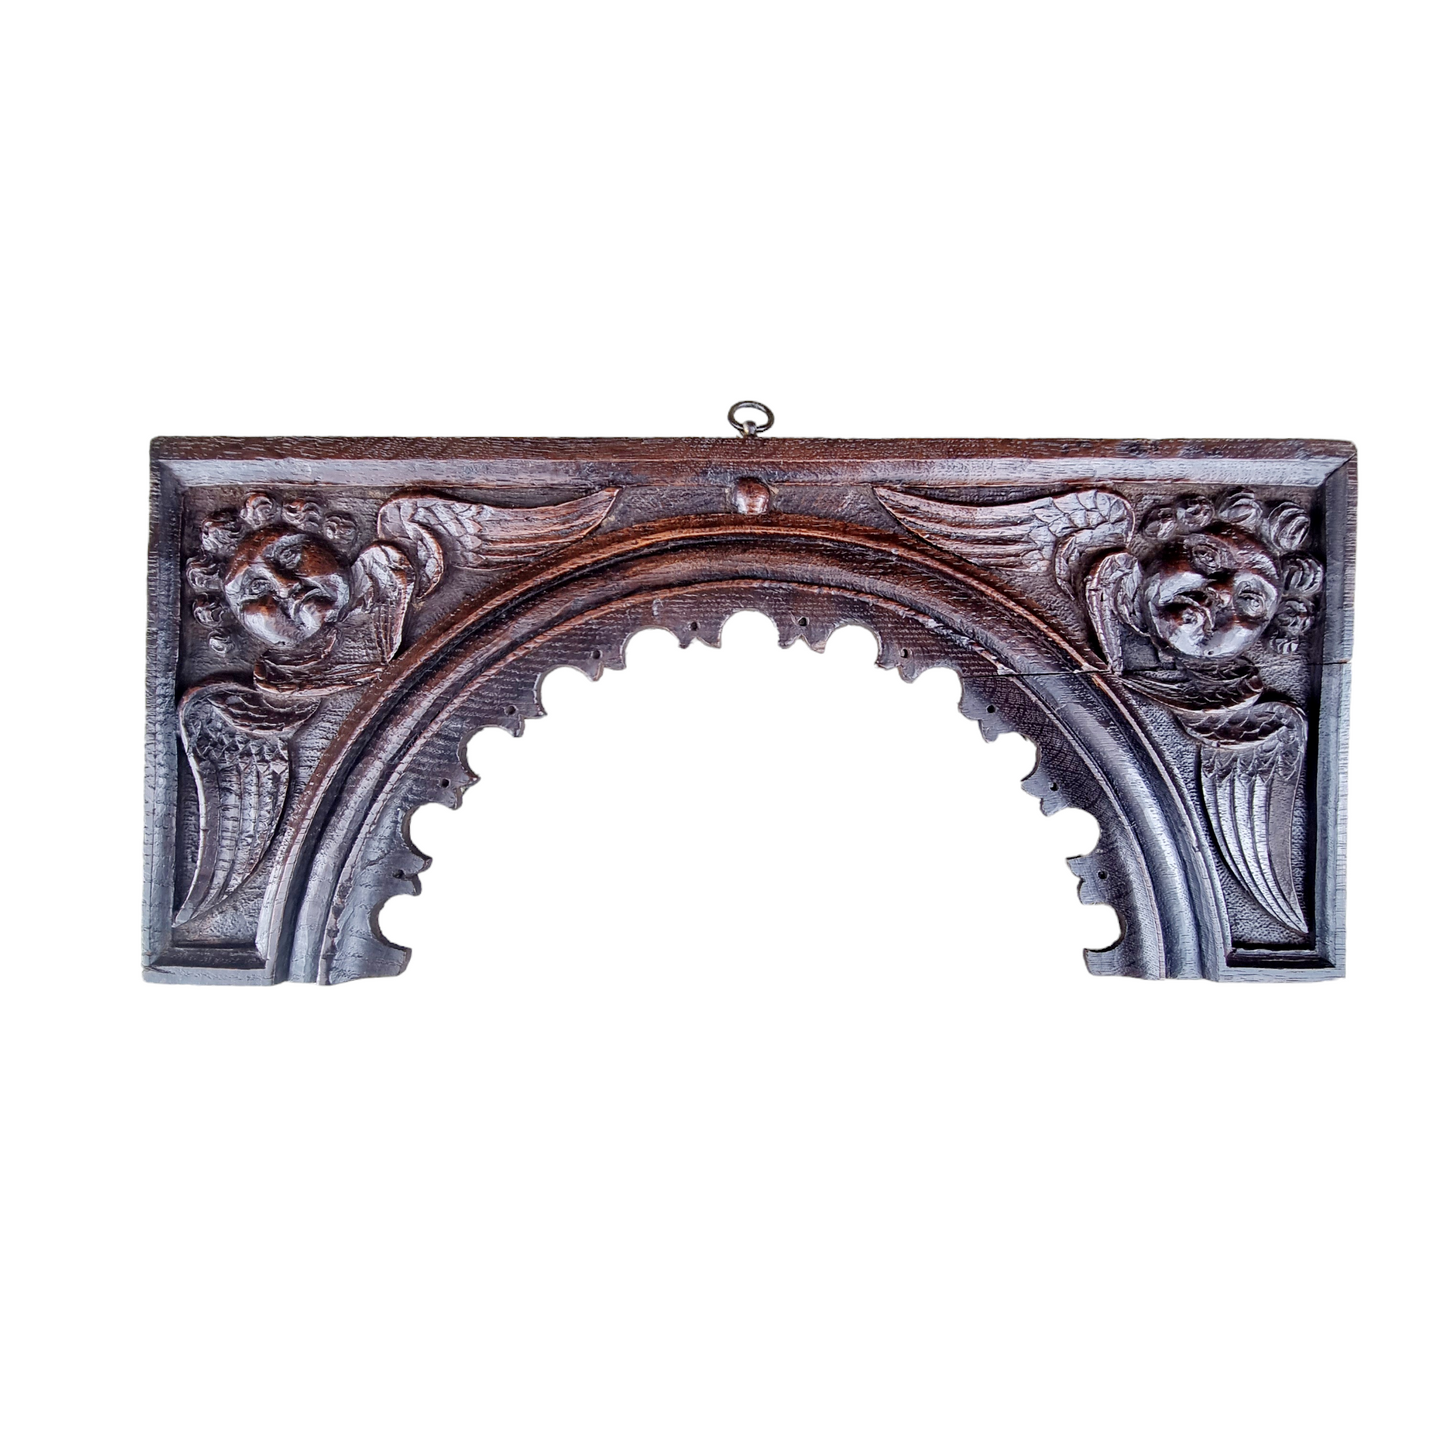 16th Century English Antique Carved Oak Arcaded Panel